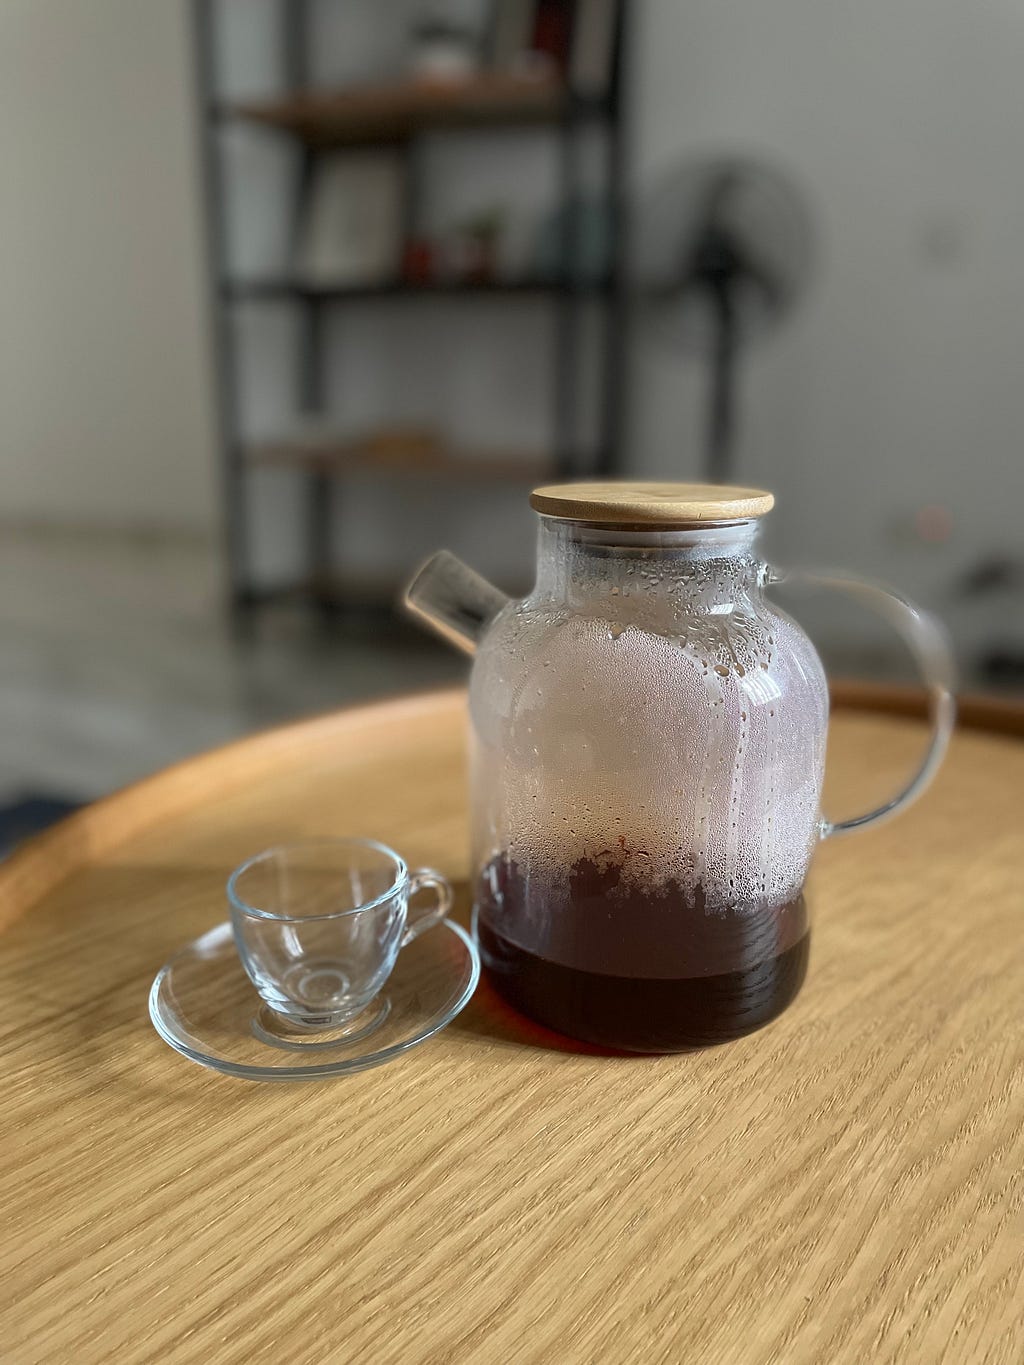 A glass jug with a wooden lid and a glass tea cup